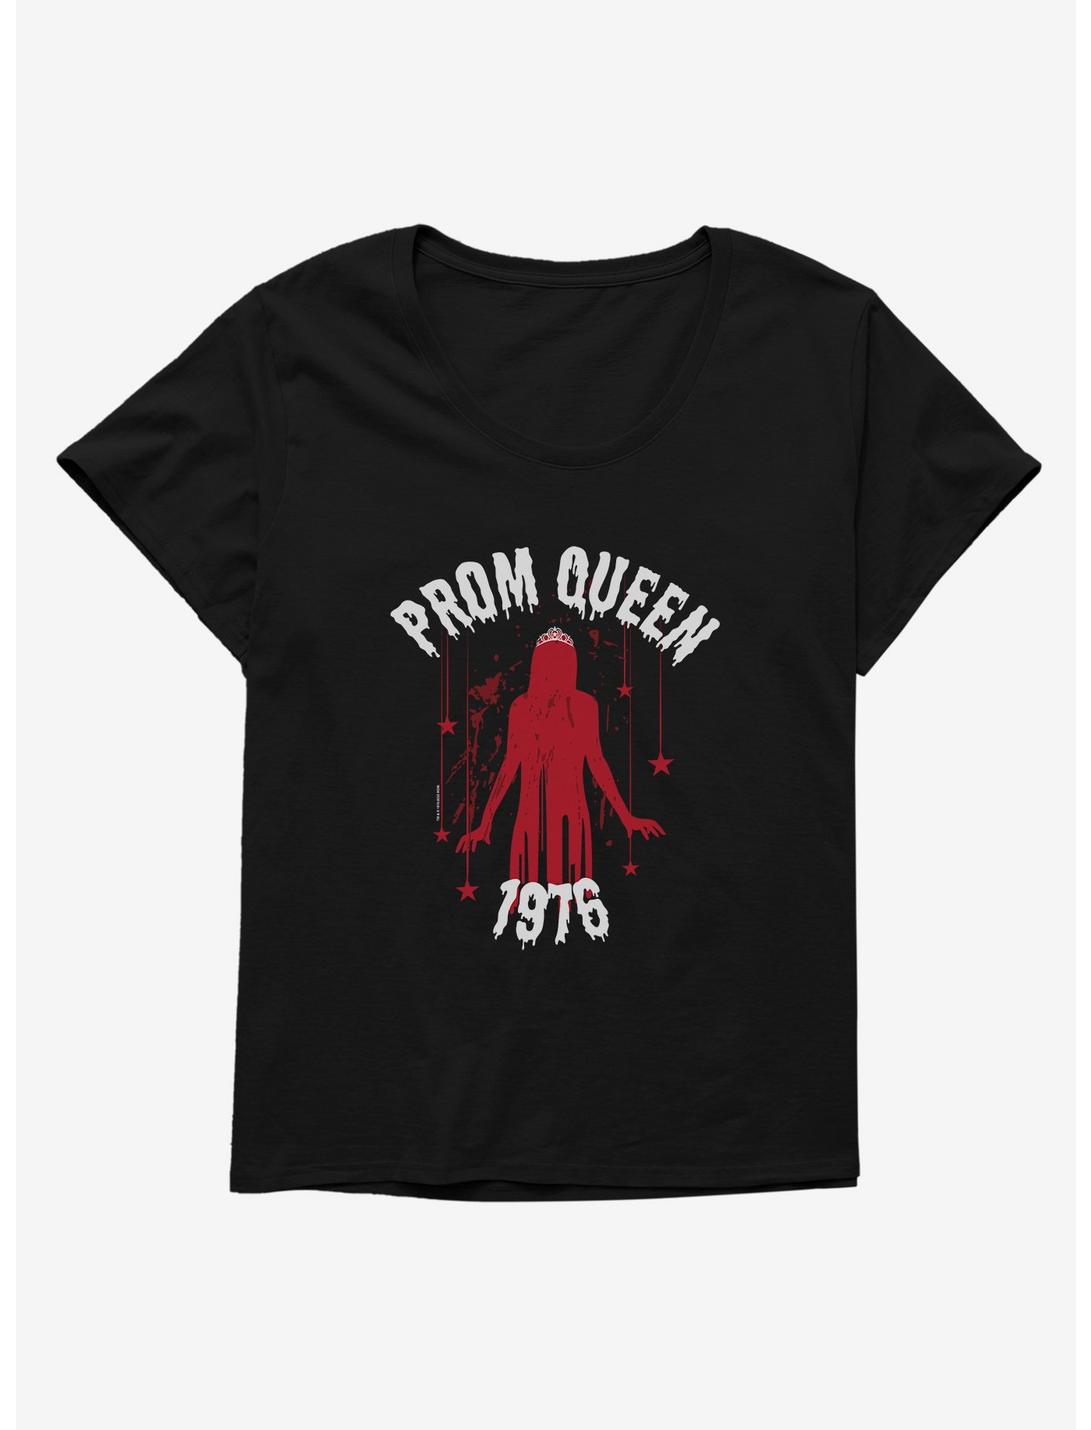 Carrie 1976 Red Silhouette Womens T-Shirt Plus Size, BLACK, hi-res